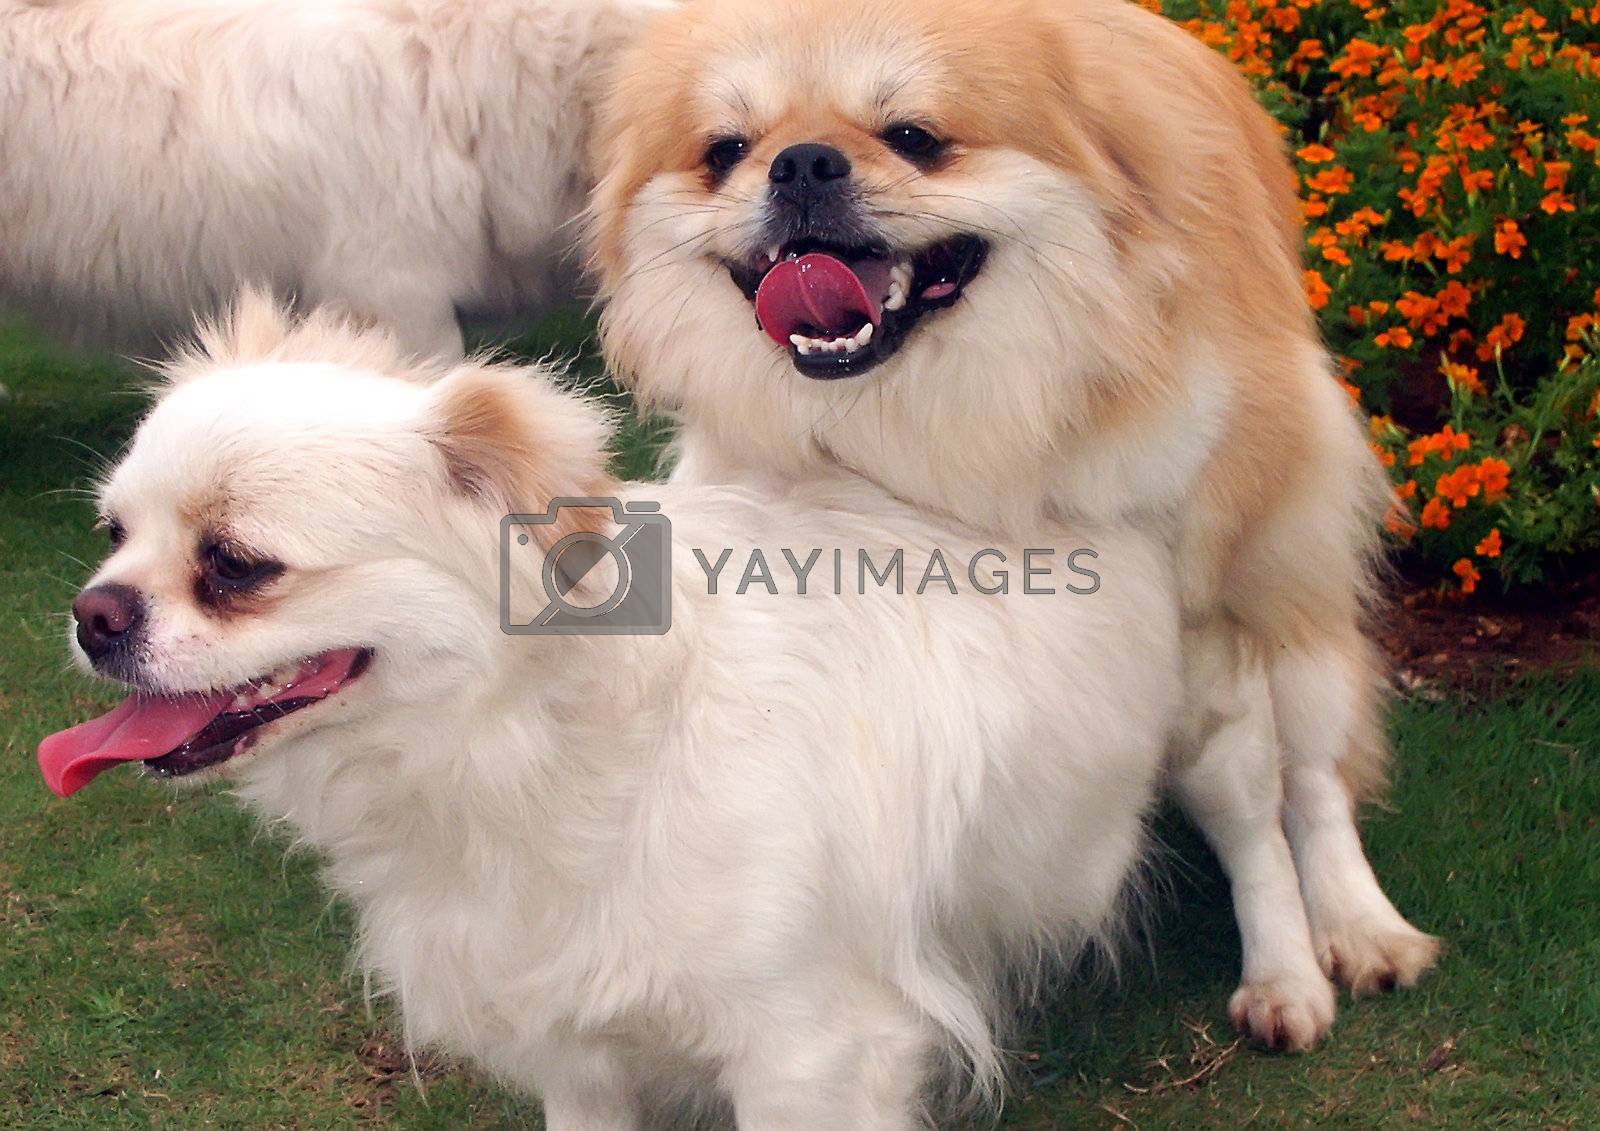 Royalty free image of Dogs pets by xfdly5